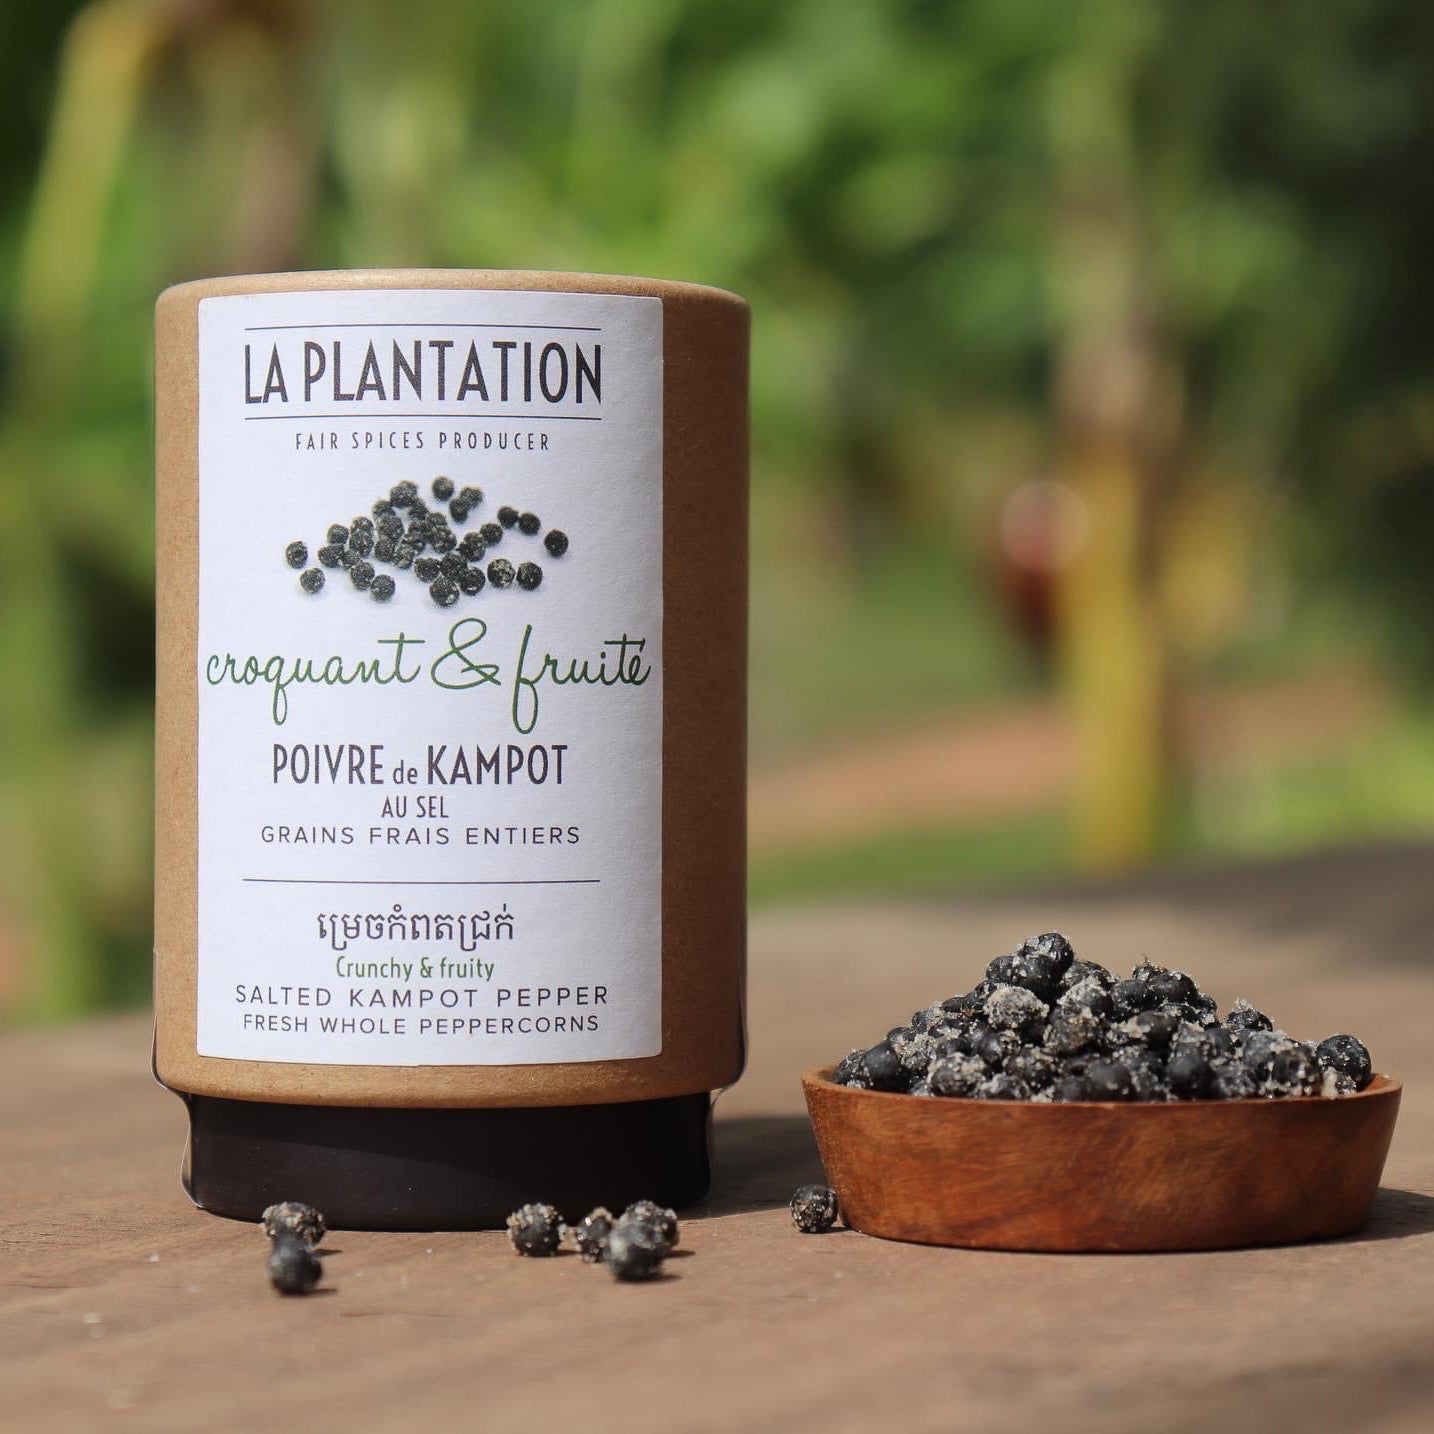 Hooked from the first bite, fresh Kampot salted pepper is your best pepper for your home cooking. Fabulous served with cheese, oysters in pepper sauces and straight up. Serve on a charcuterie board like you would olives or capers.